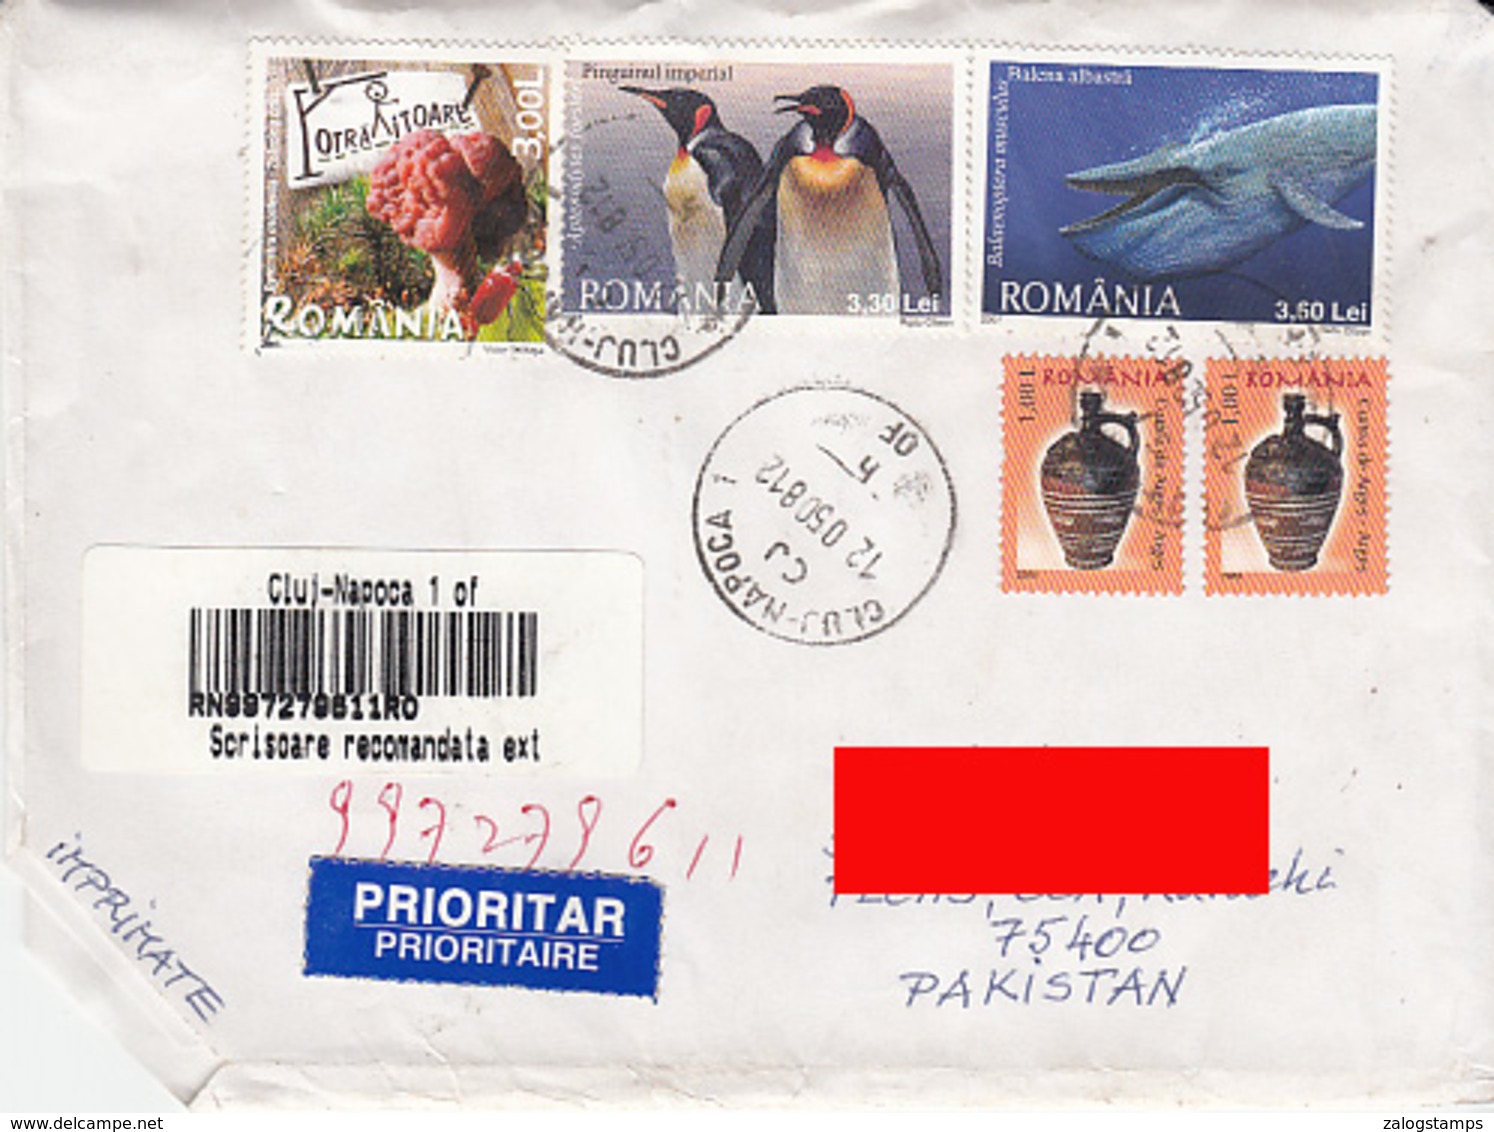 Romania Airmail Cover To Pakistan, Stamps, Birds    (A-3100-special-3) - Covers & Documents